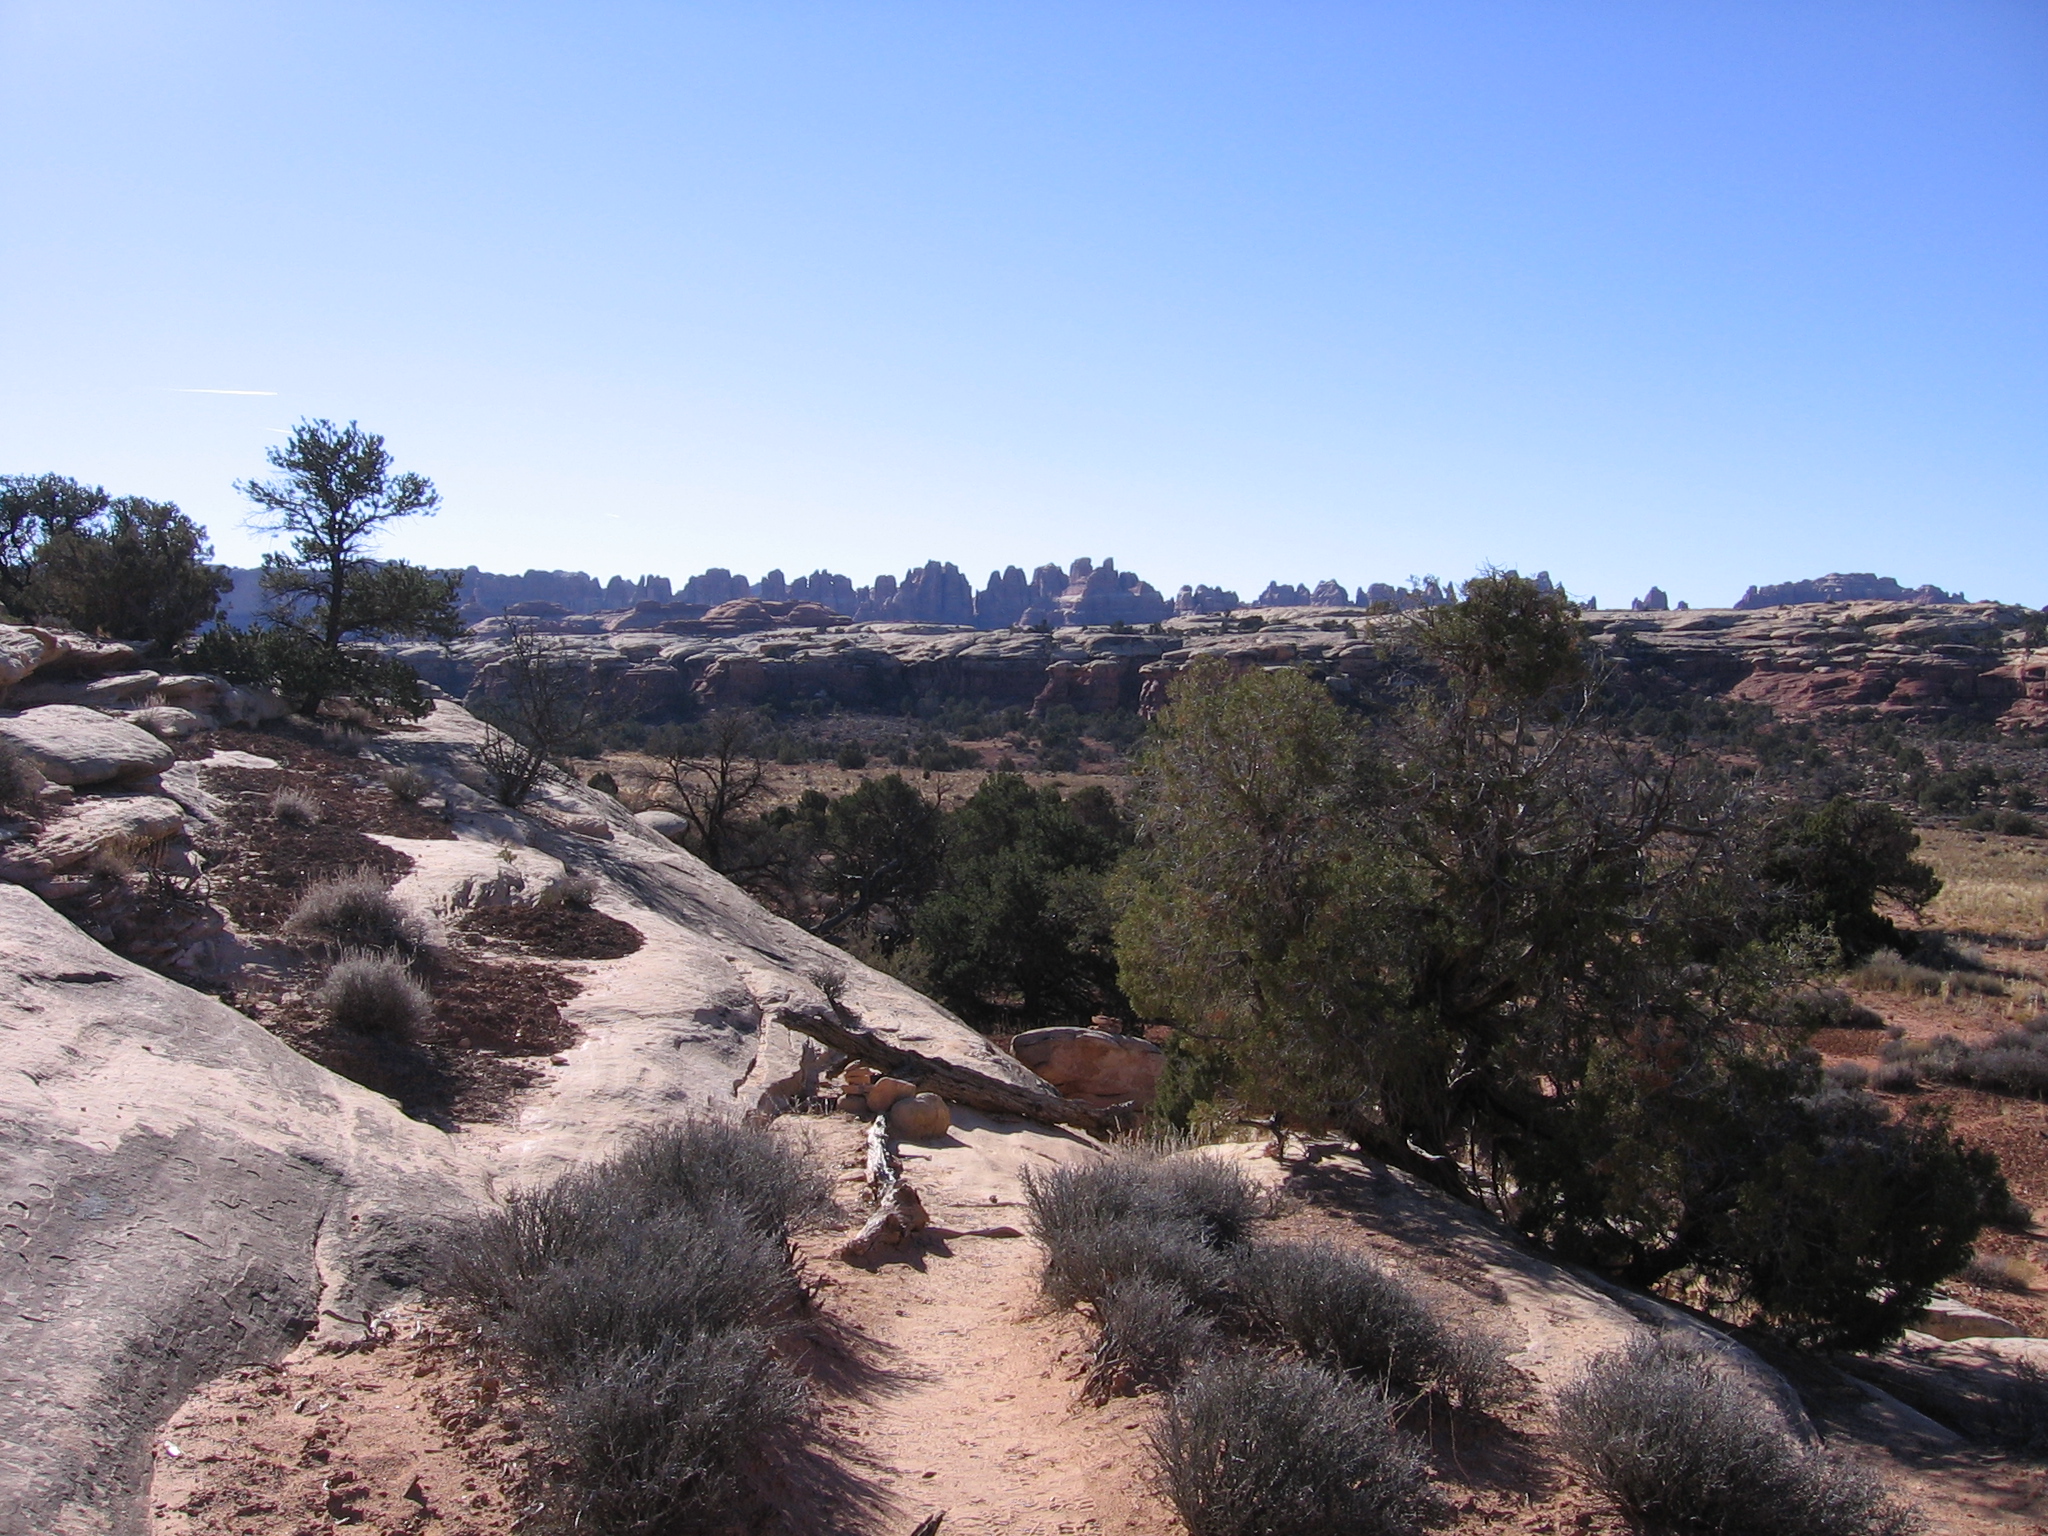 Starting to hike from the Squaw Flat trailhead in Canyonlands.